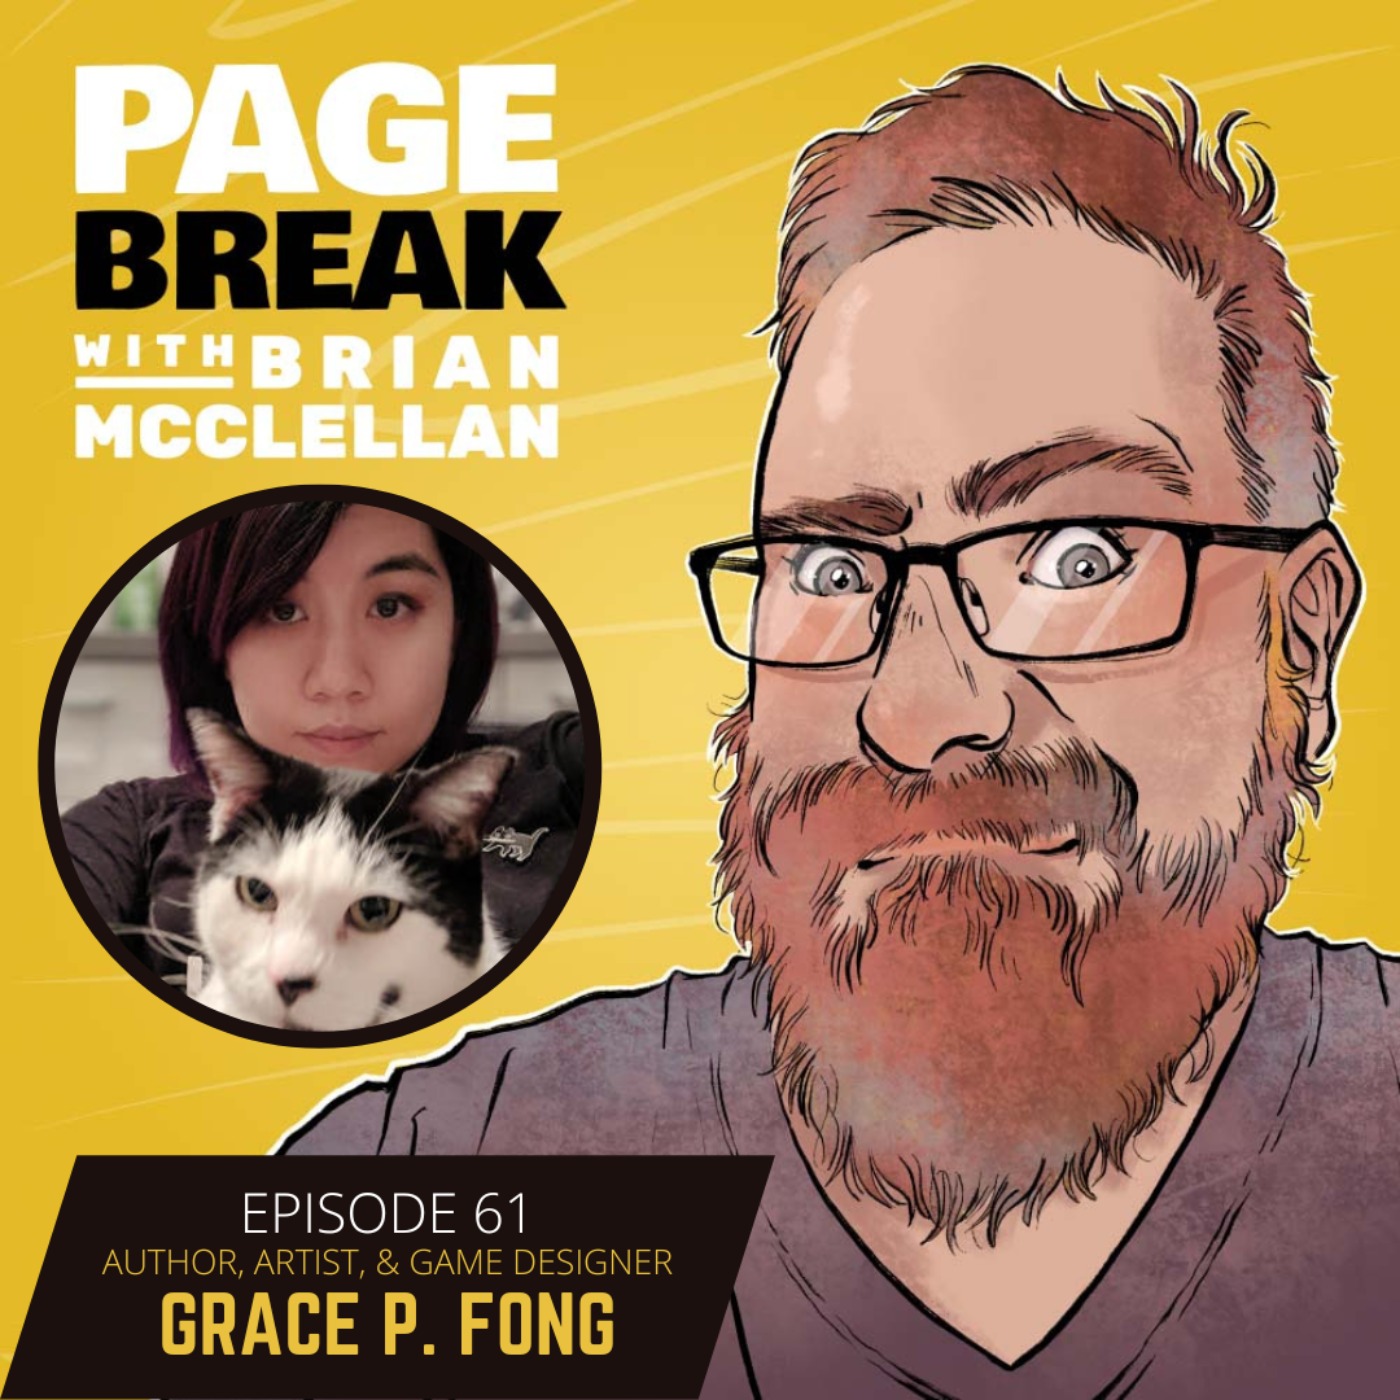 Ep 61 - Grace P. Fong - Author, Artist, and Game Designer